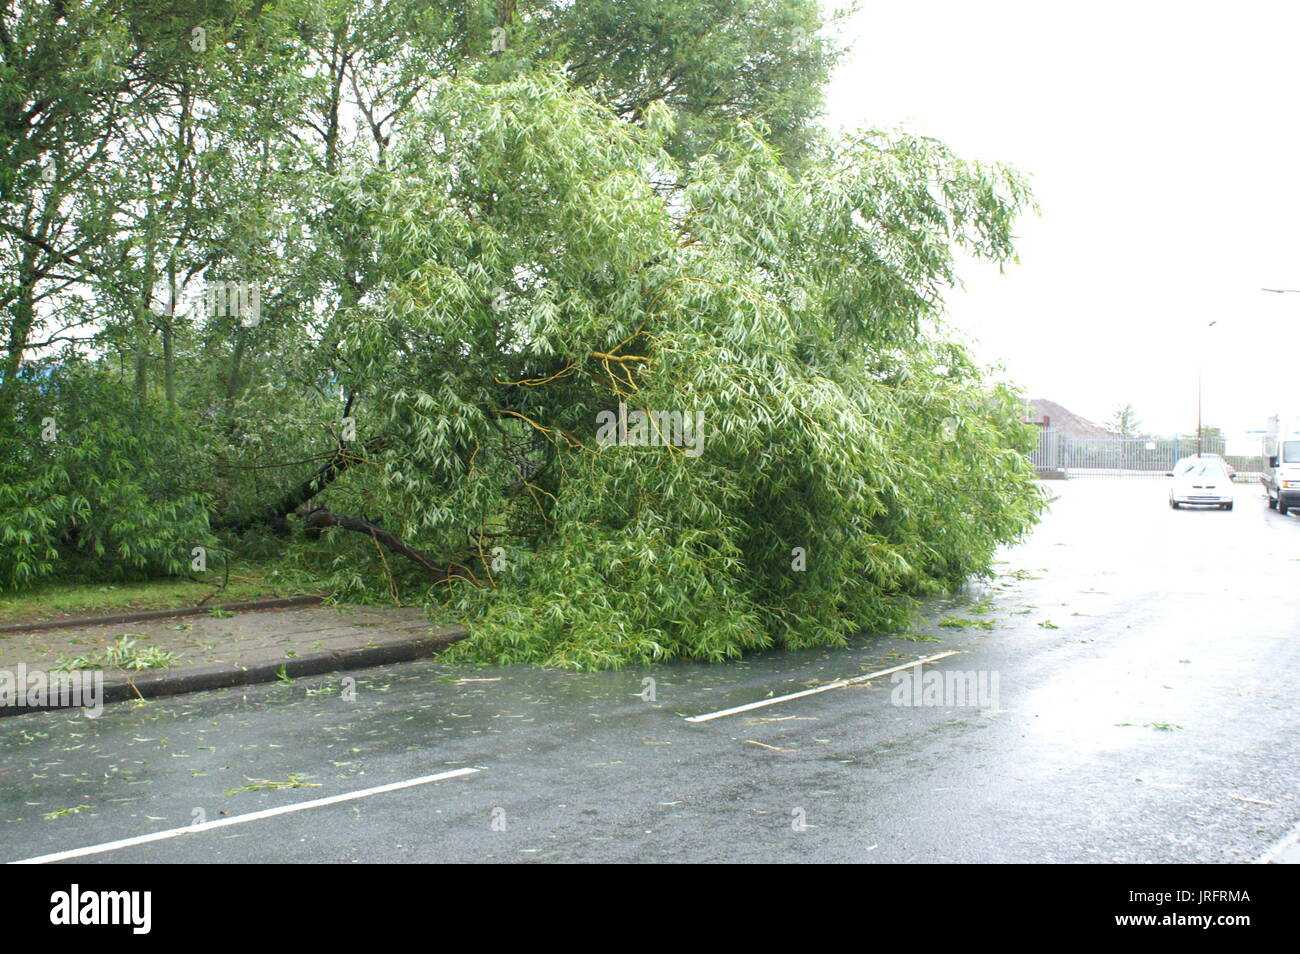 Gail force winds, fallen trees Stock Photo